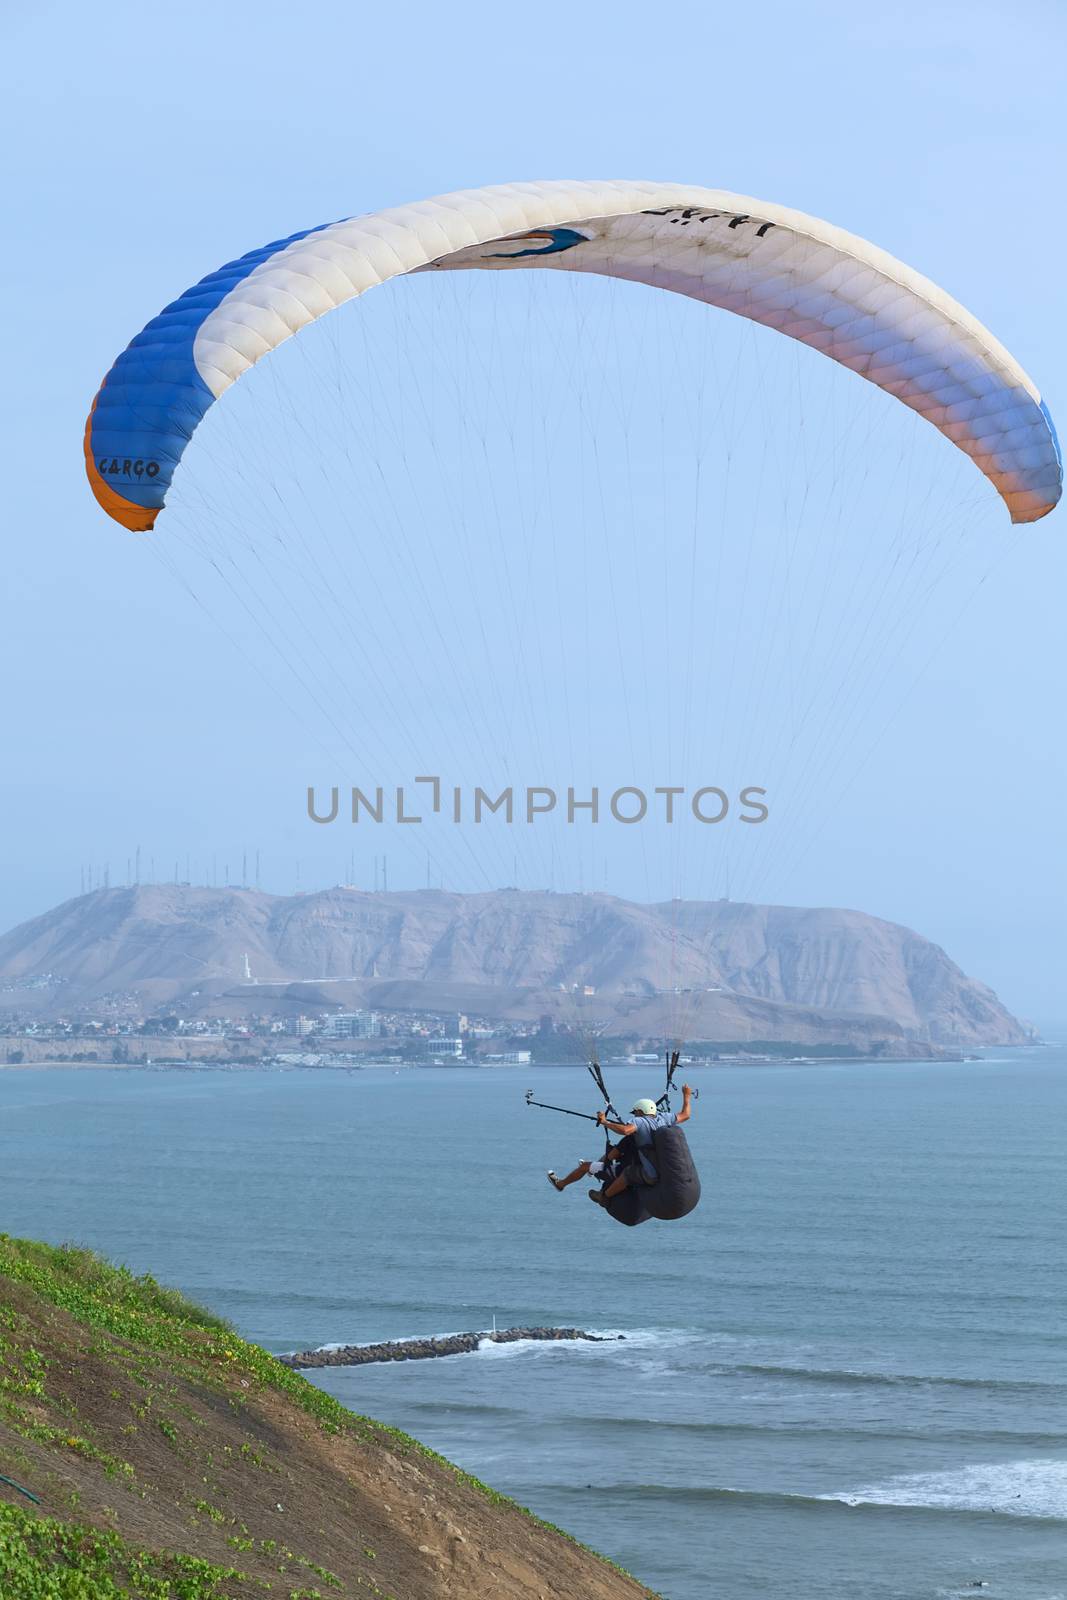 LIMA, PERU - MARCH 19, 2012: Unidentified people in paragliding tandem flight at the coast of Miraflores with view onto Chorrillos in the back on March 19, 2012 in Lima, Peru. Paragliding is a popular sport on the coast of Miraflores, where winds are usually good and in good weather a big part of the coast of Lima can be seen. 